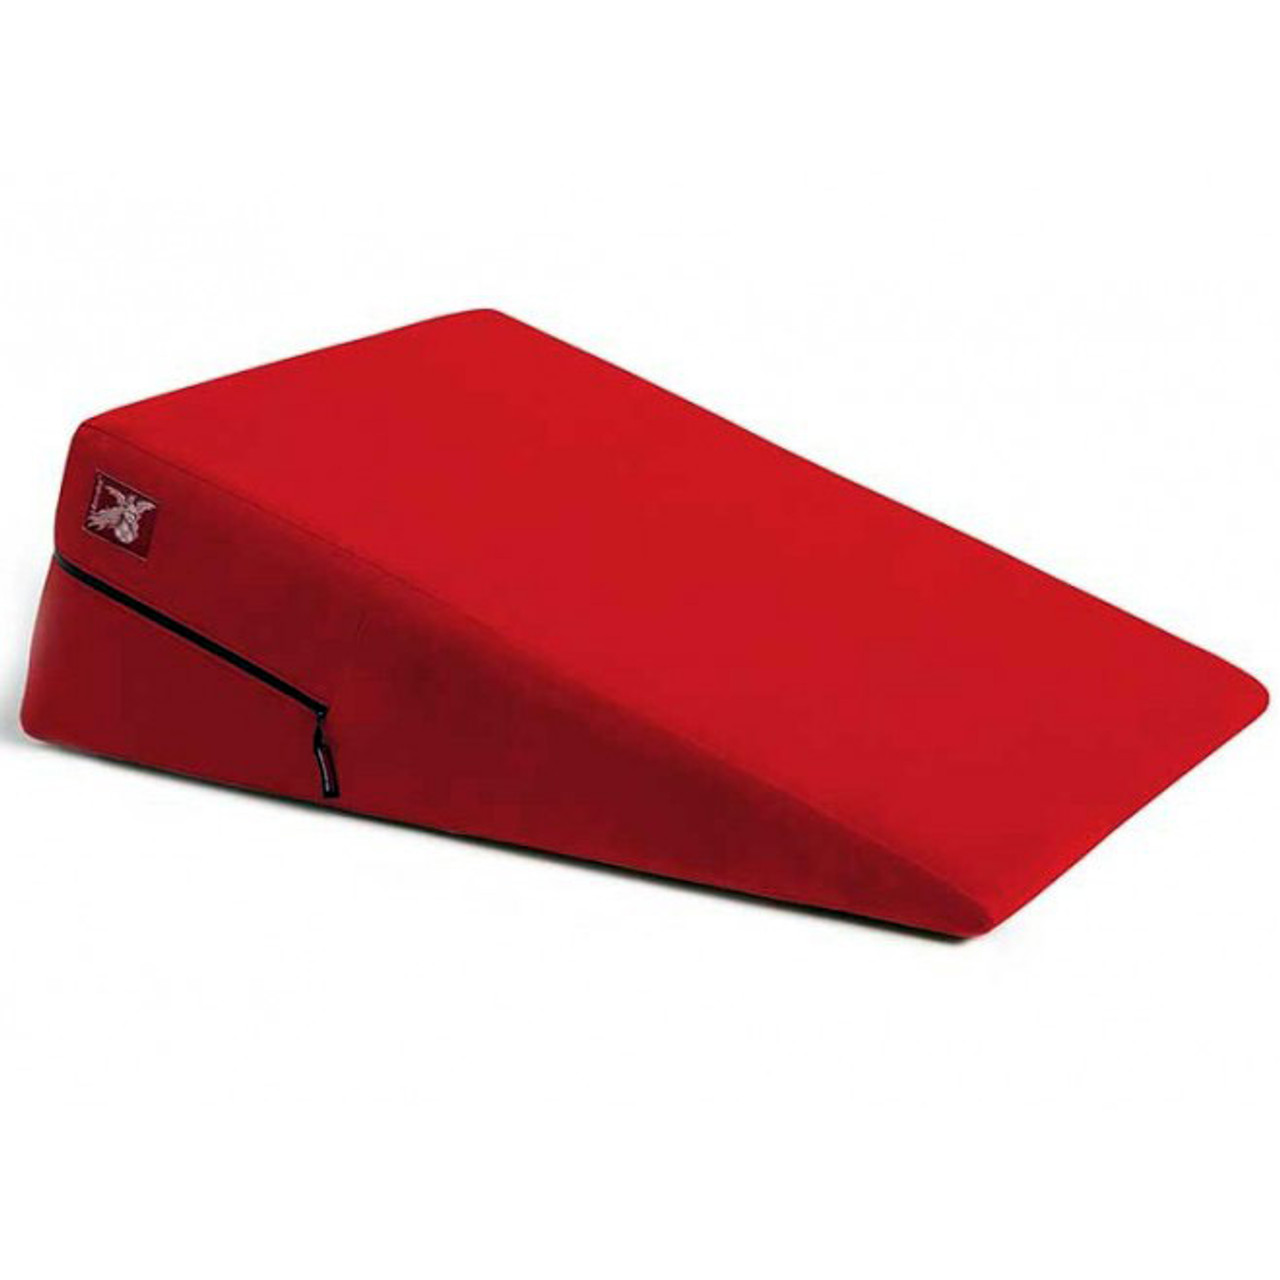 Liberator Plus Size Ramp Position Pillow Flame Red Microfiber Dallas Novelty Online Sex Toys